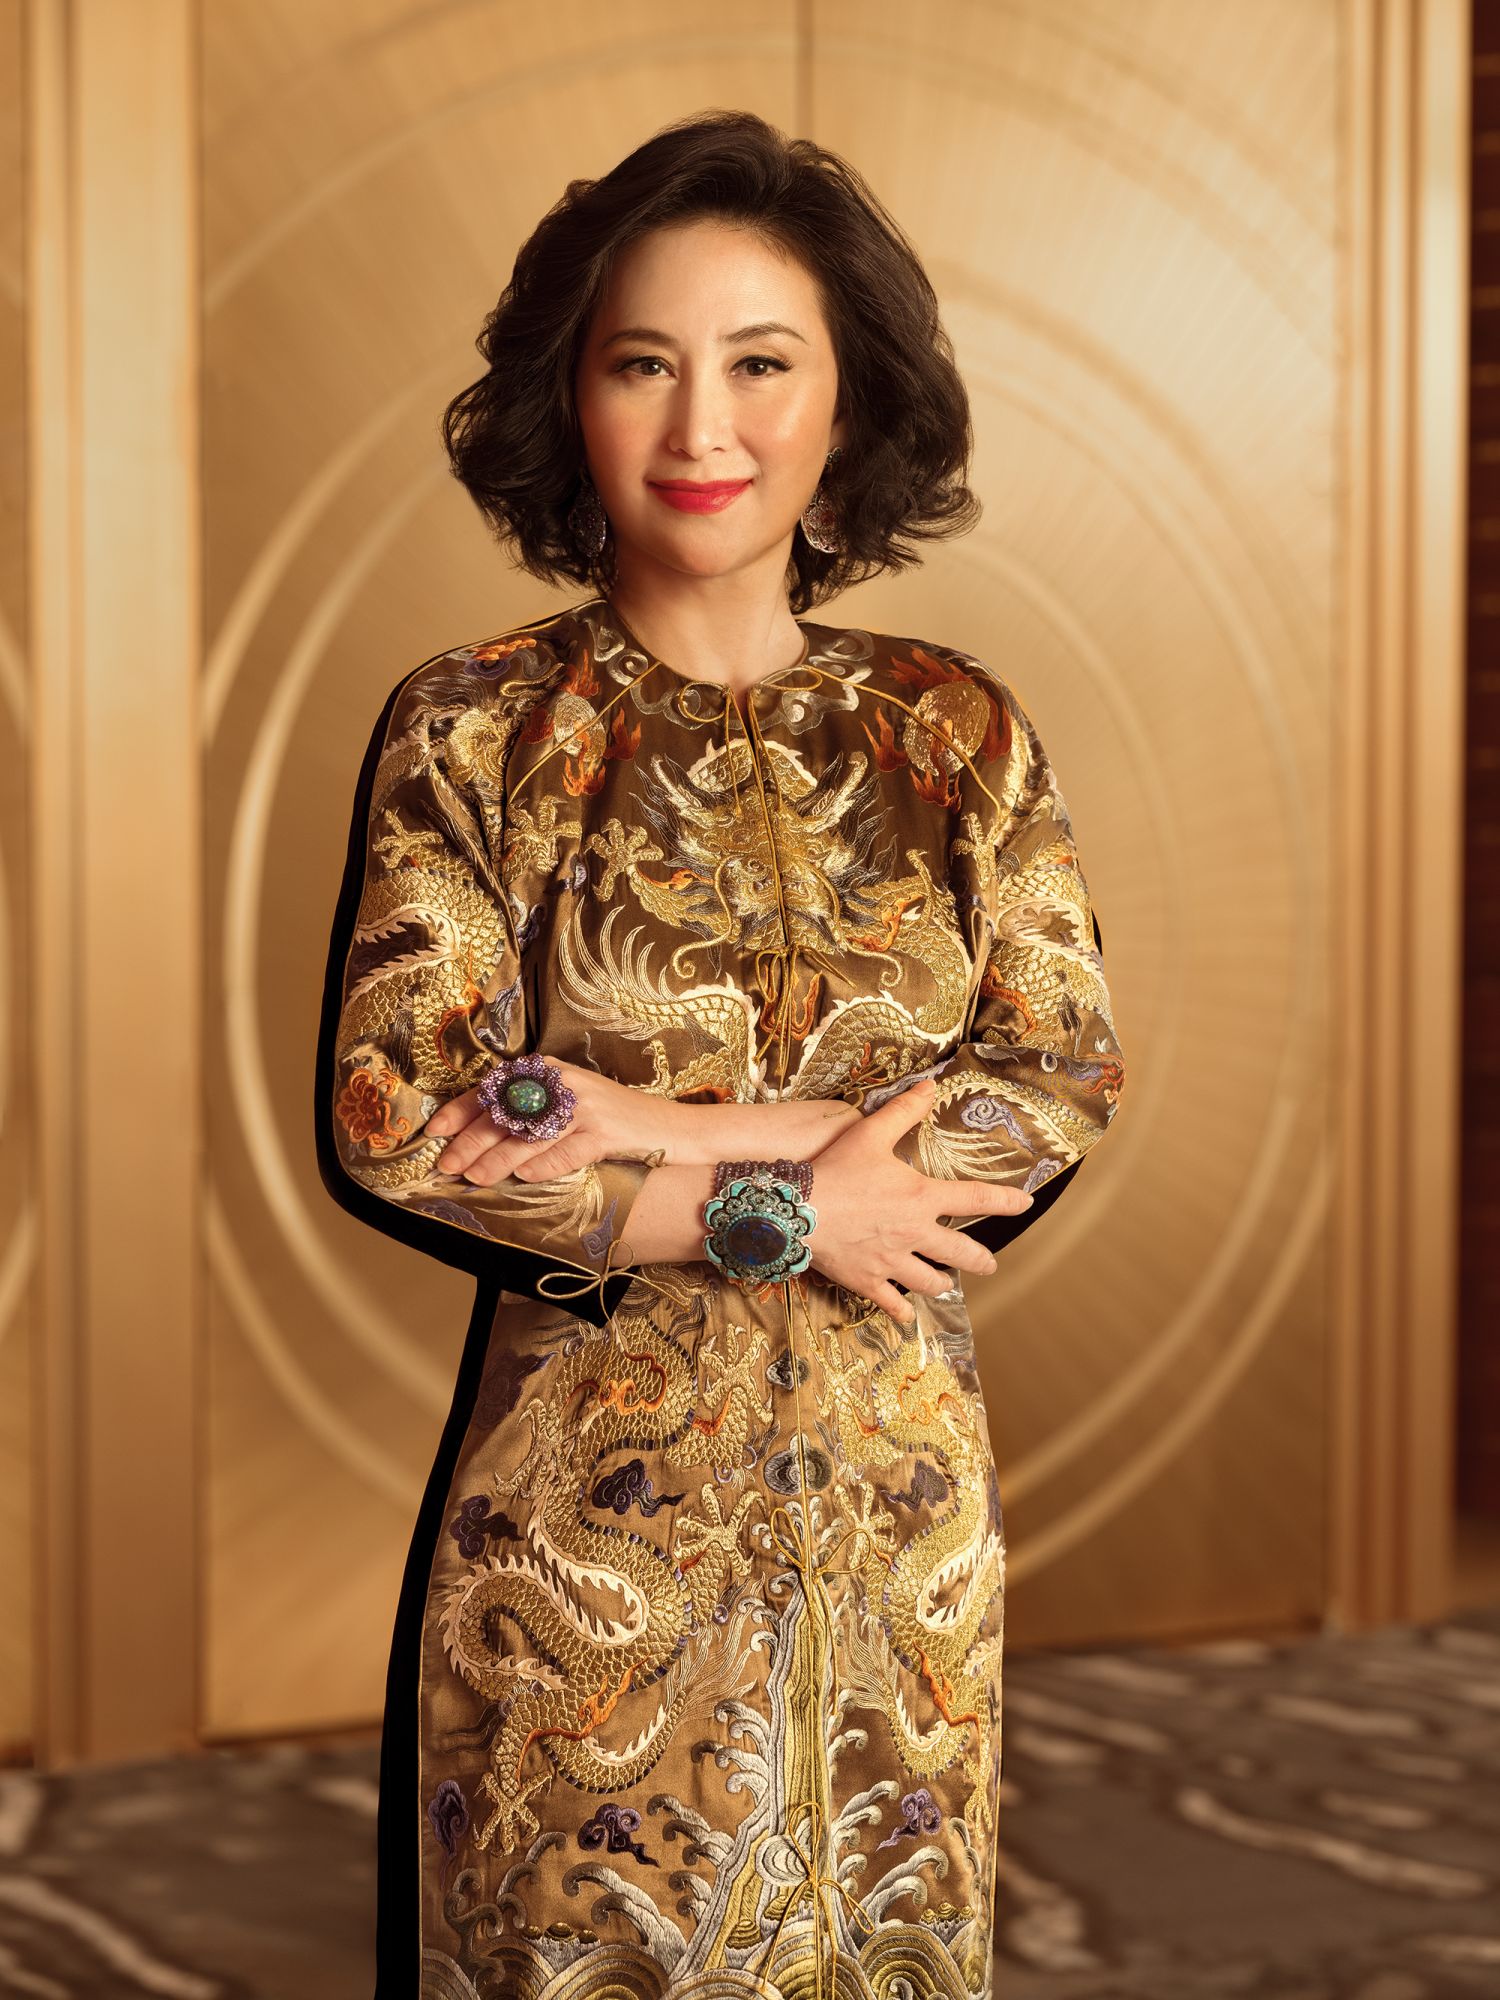 Co-owner of MGM Grand Macau - Pansy Ho